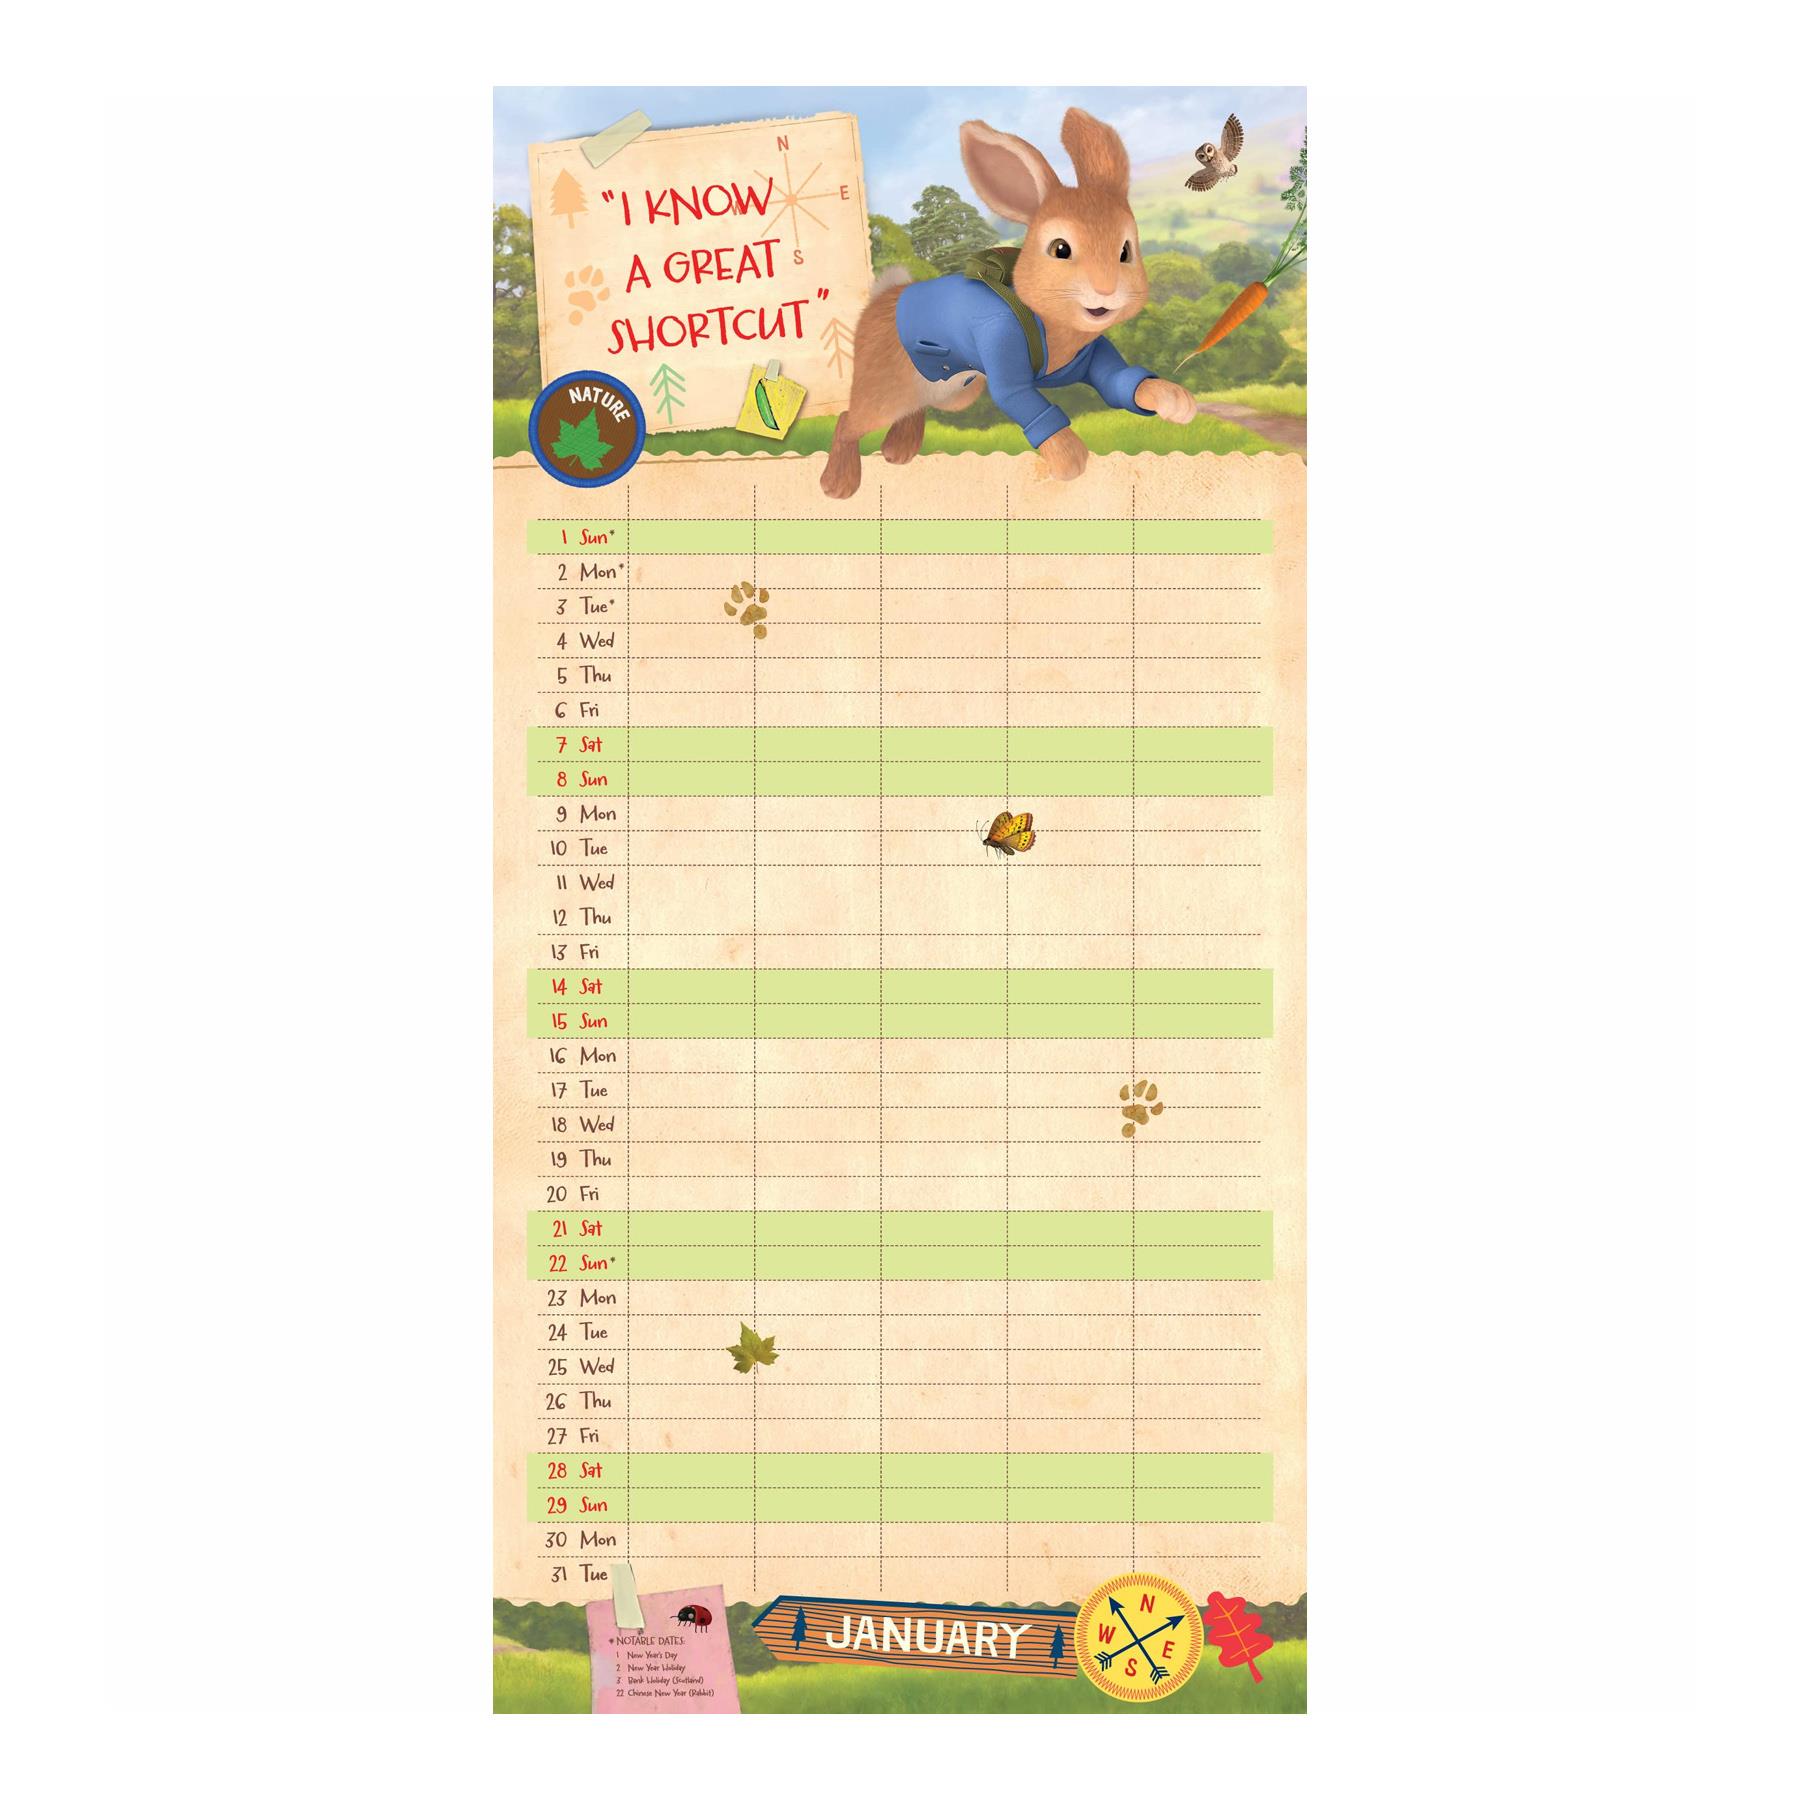 Peter Rabbit 2023 Family Calendar Square Official Licensed You Me and the Kids